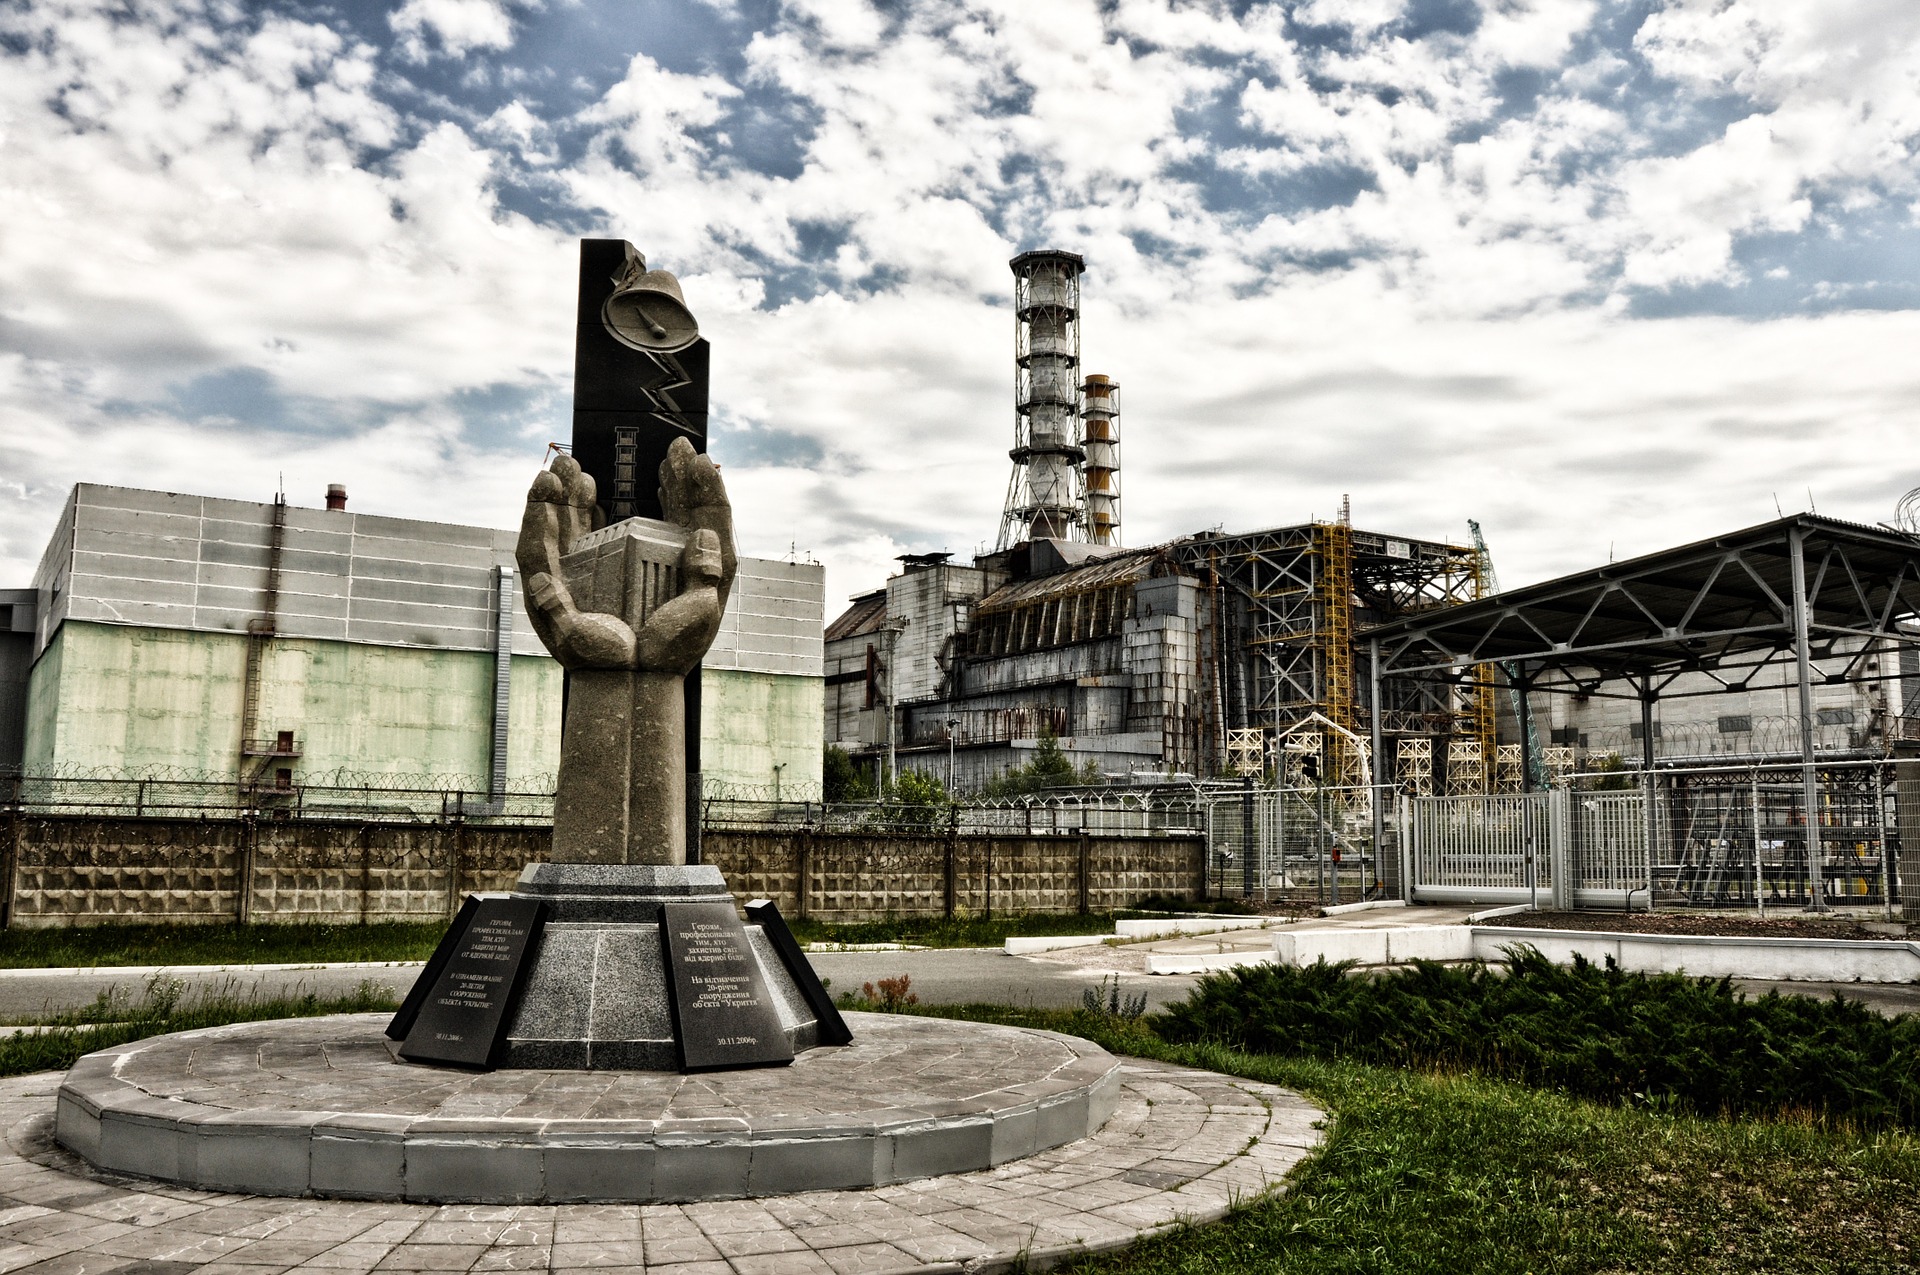 The Chernobyl nuclear site just lost power. Heres what that means.